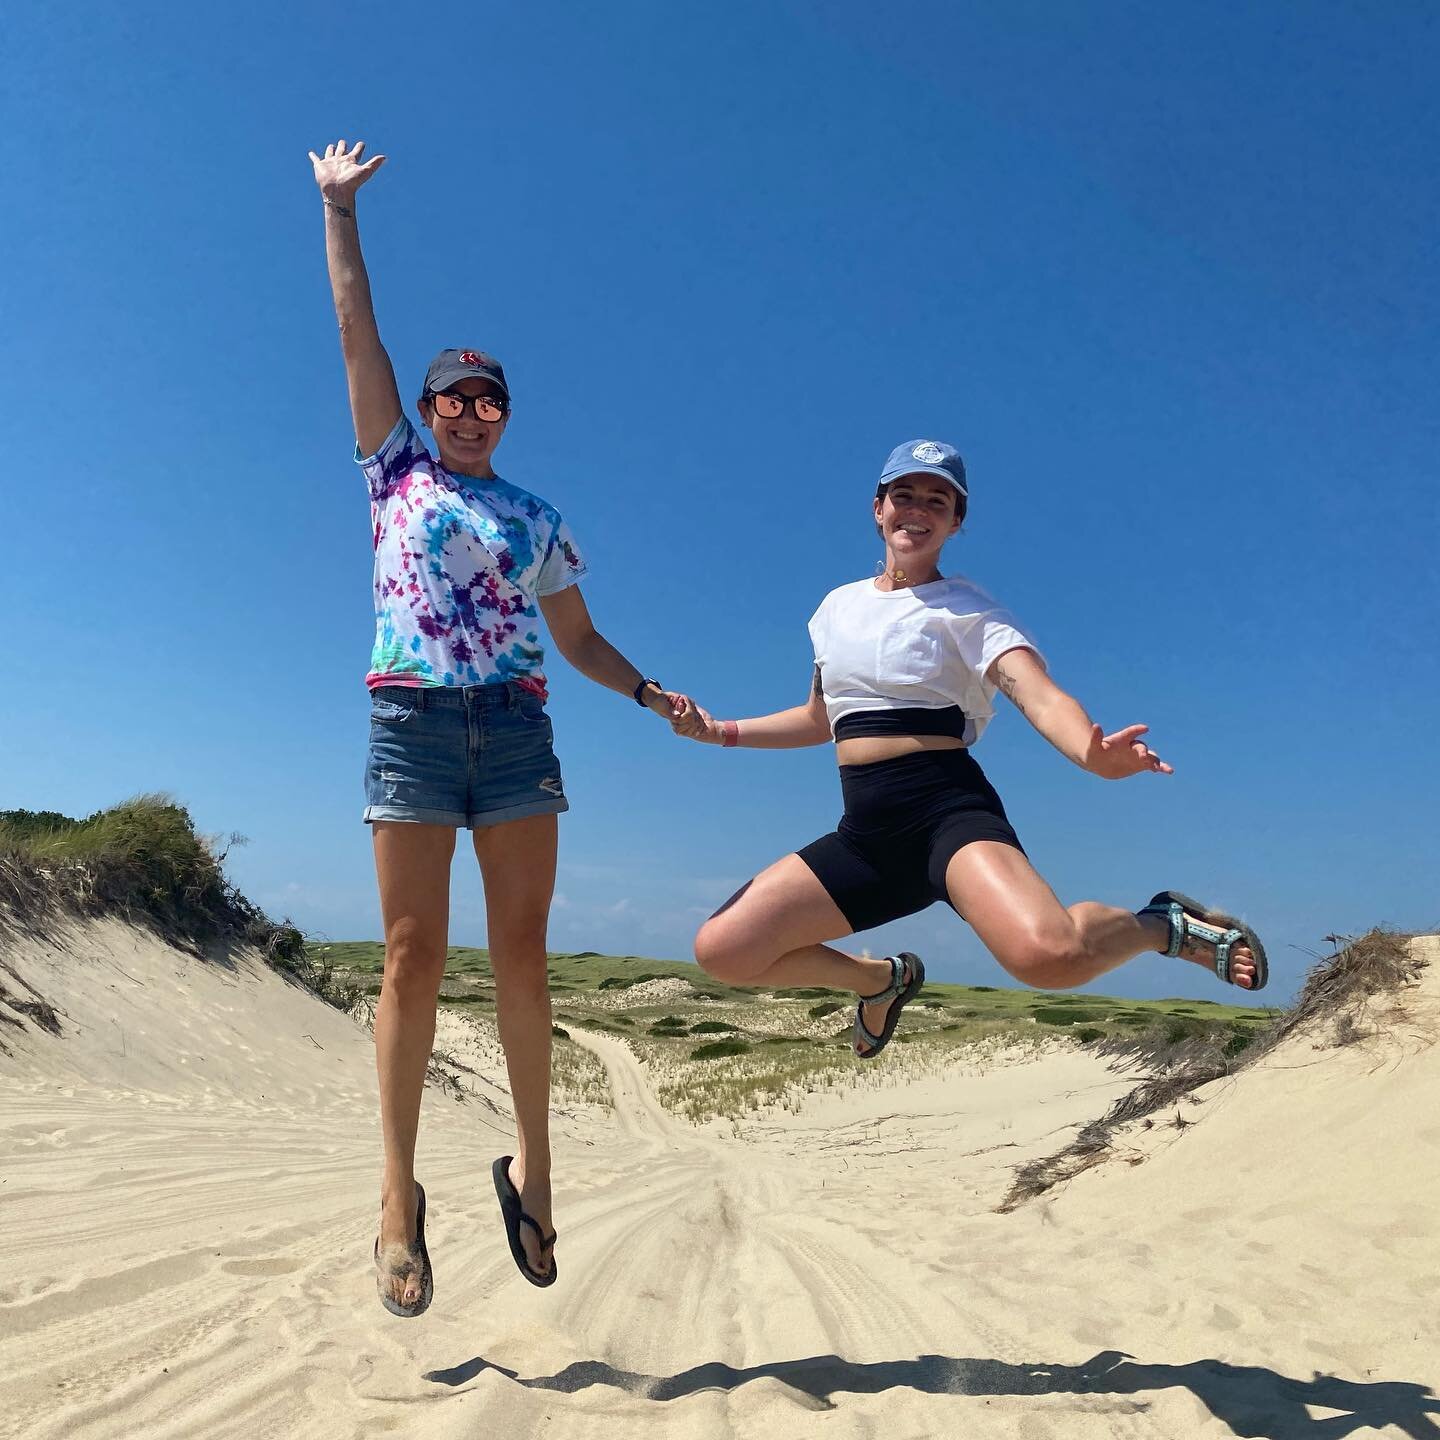 You&rsquo;ll be levitating after your trip into the dunes! 
🧞&zwj;♀️ 
🧞&zwj;♂️ 
🧞 
* development of spidey powers not included with tour &hellip; not saying it couldn&rsquo;t happen though! We here at Topless Tours believe you can achieve whatever